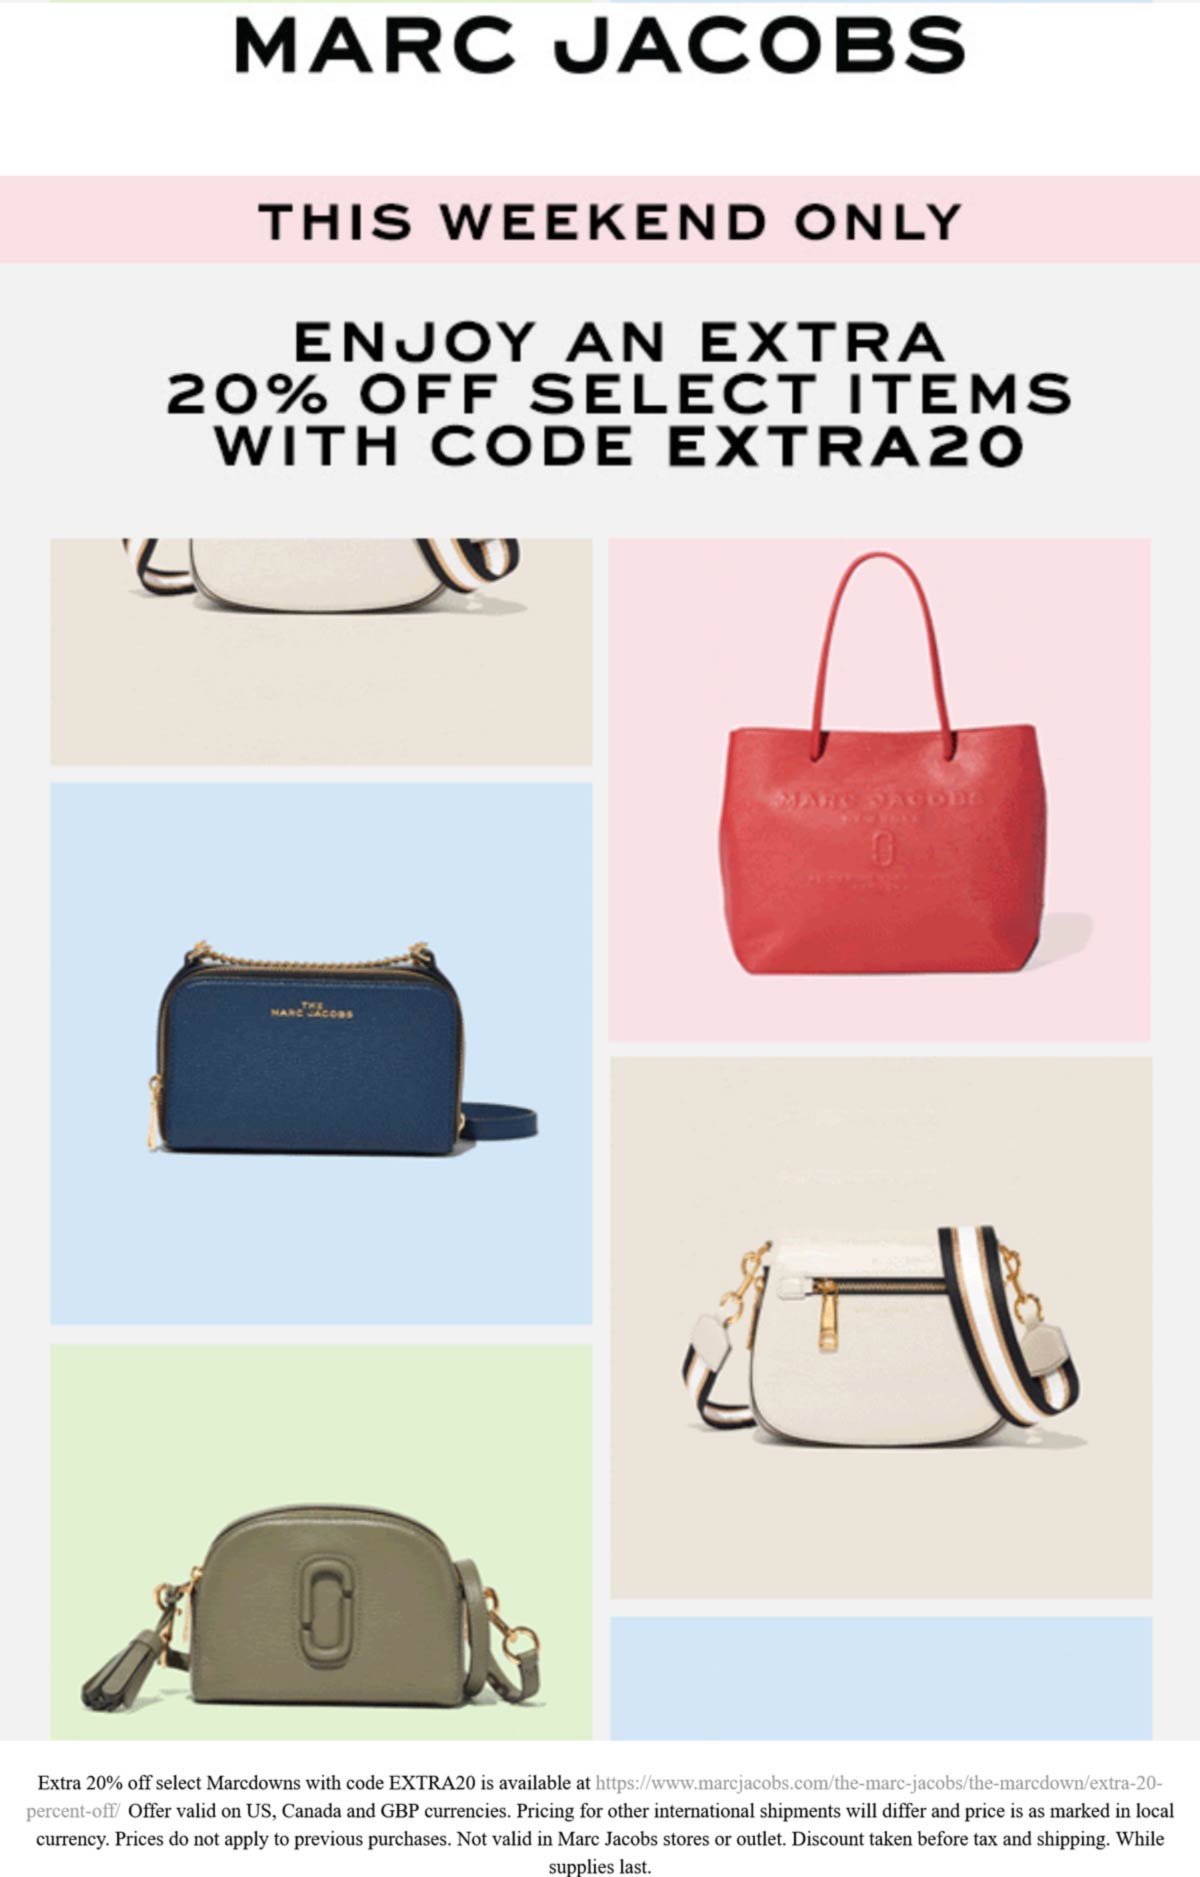 Marc Jacobs stores Coupon  Extra 20% off at Marc Jacobs via promo code EXTRA20 #marcjacobs 